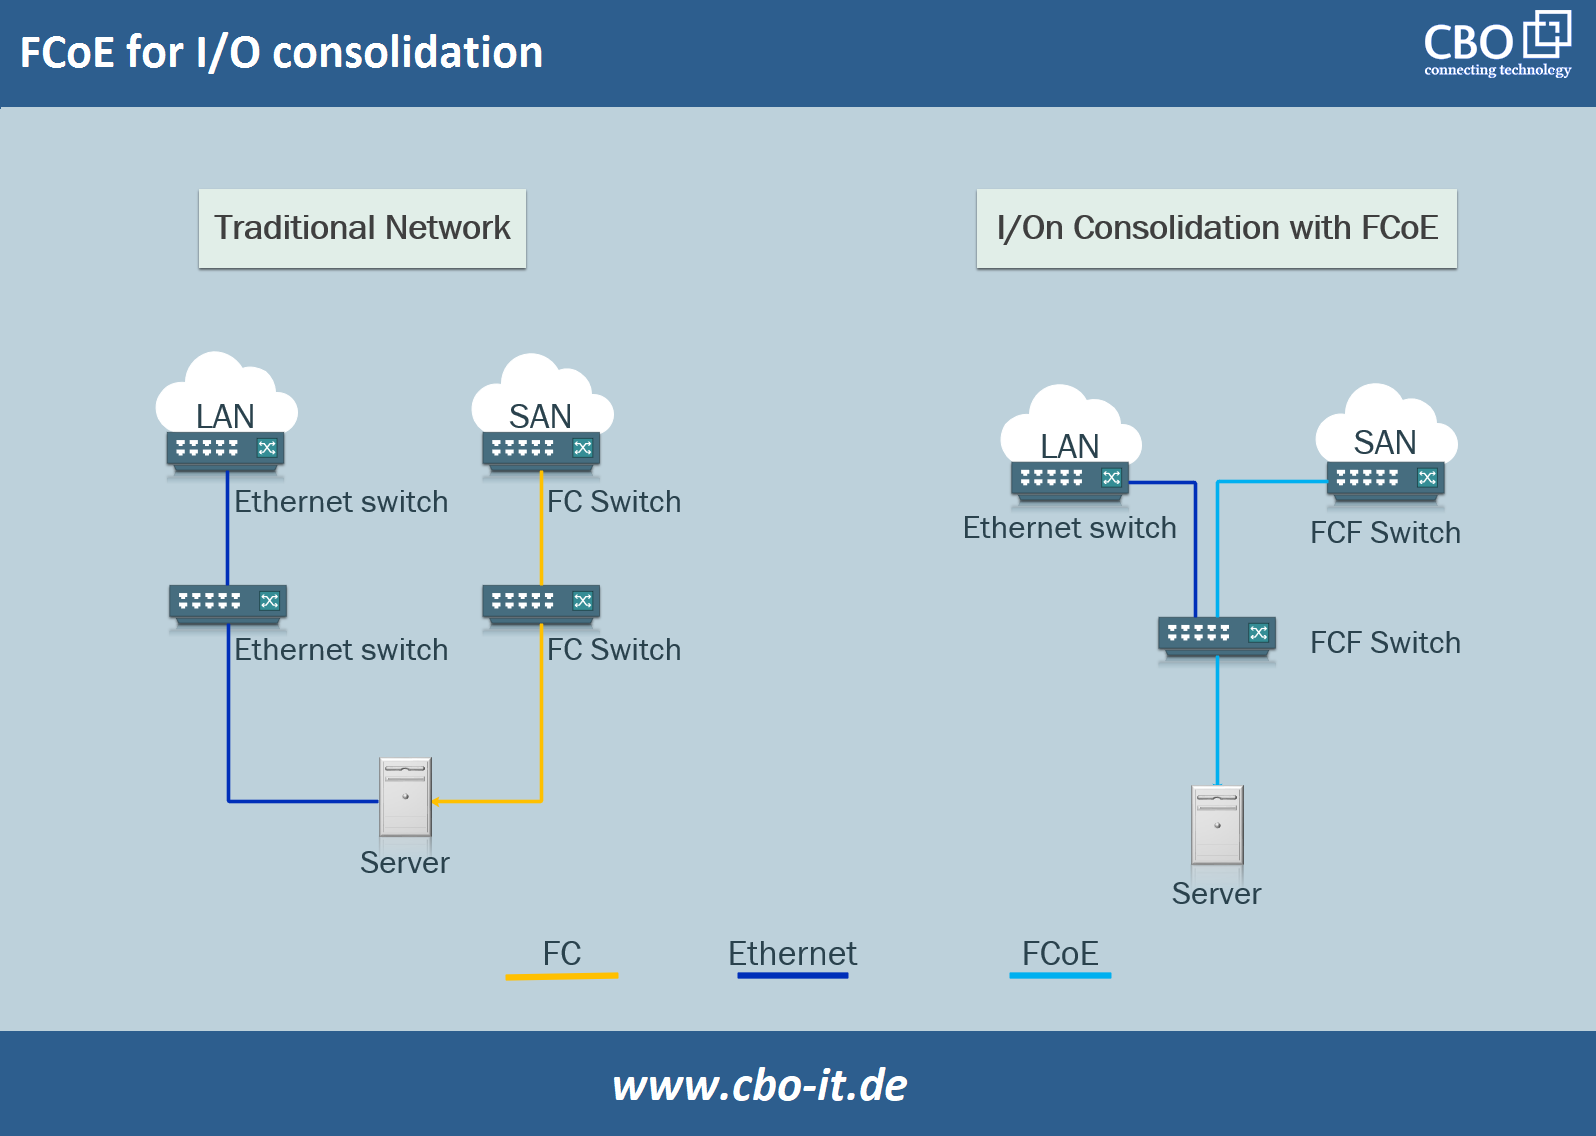 FCoE for I/O consolidation